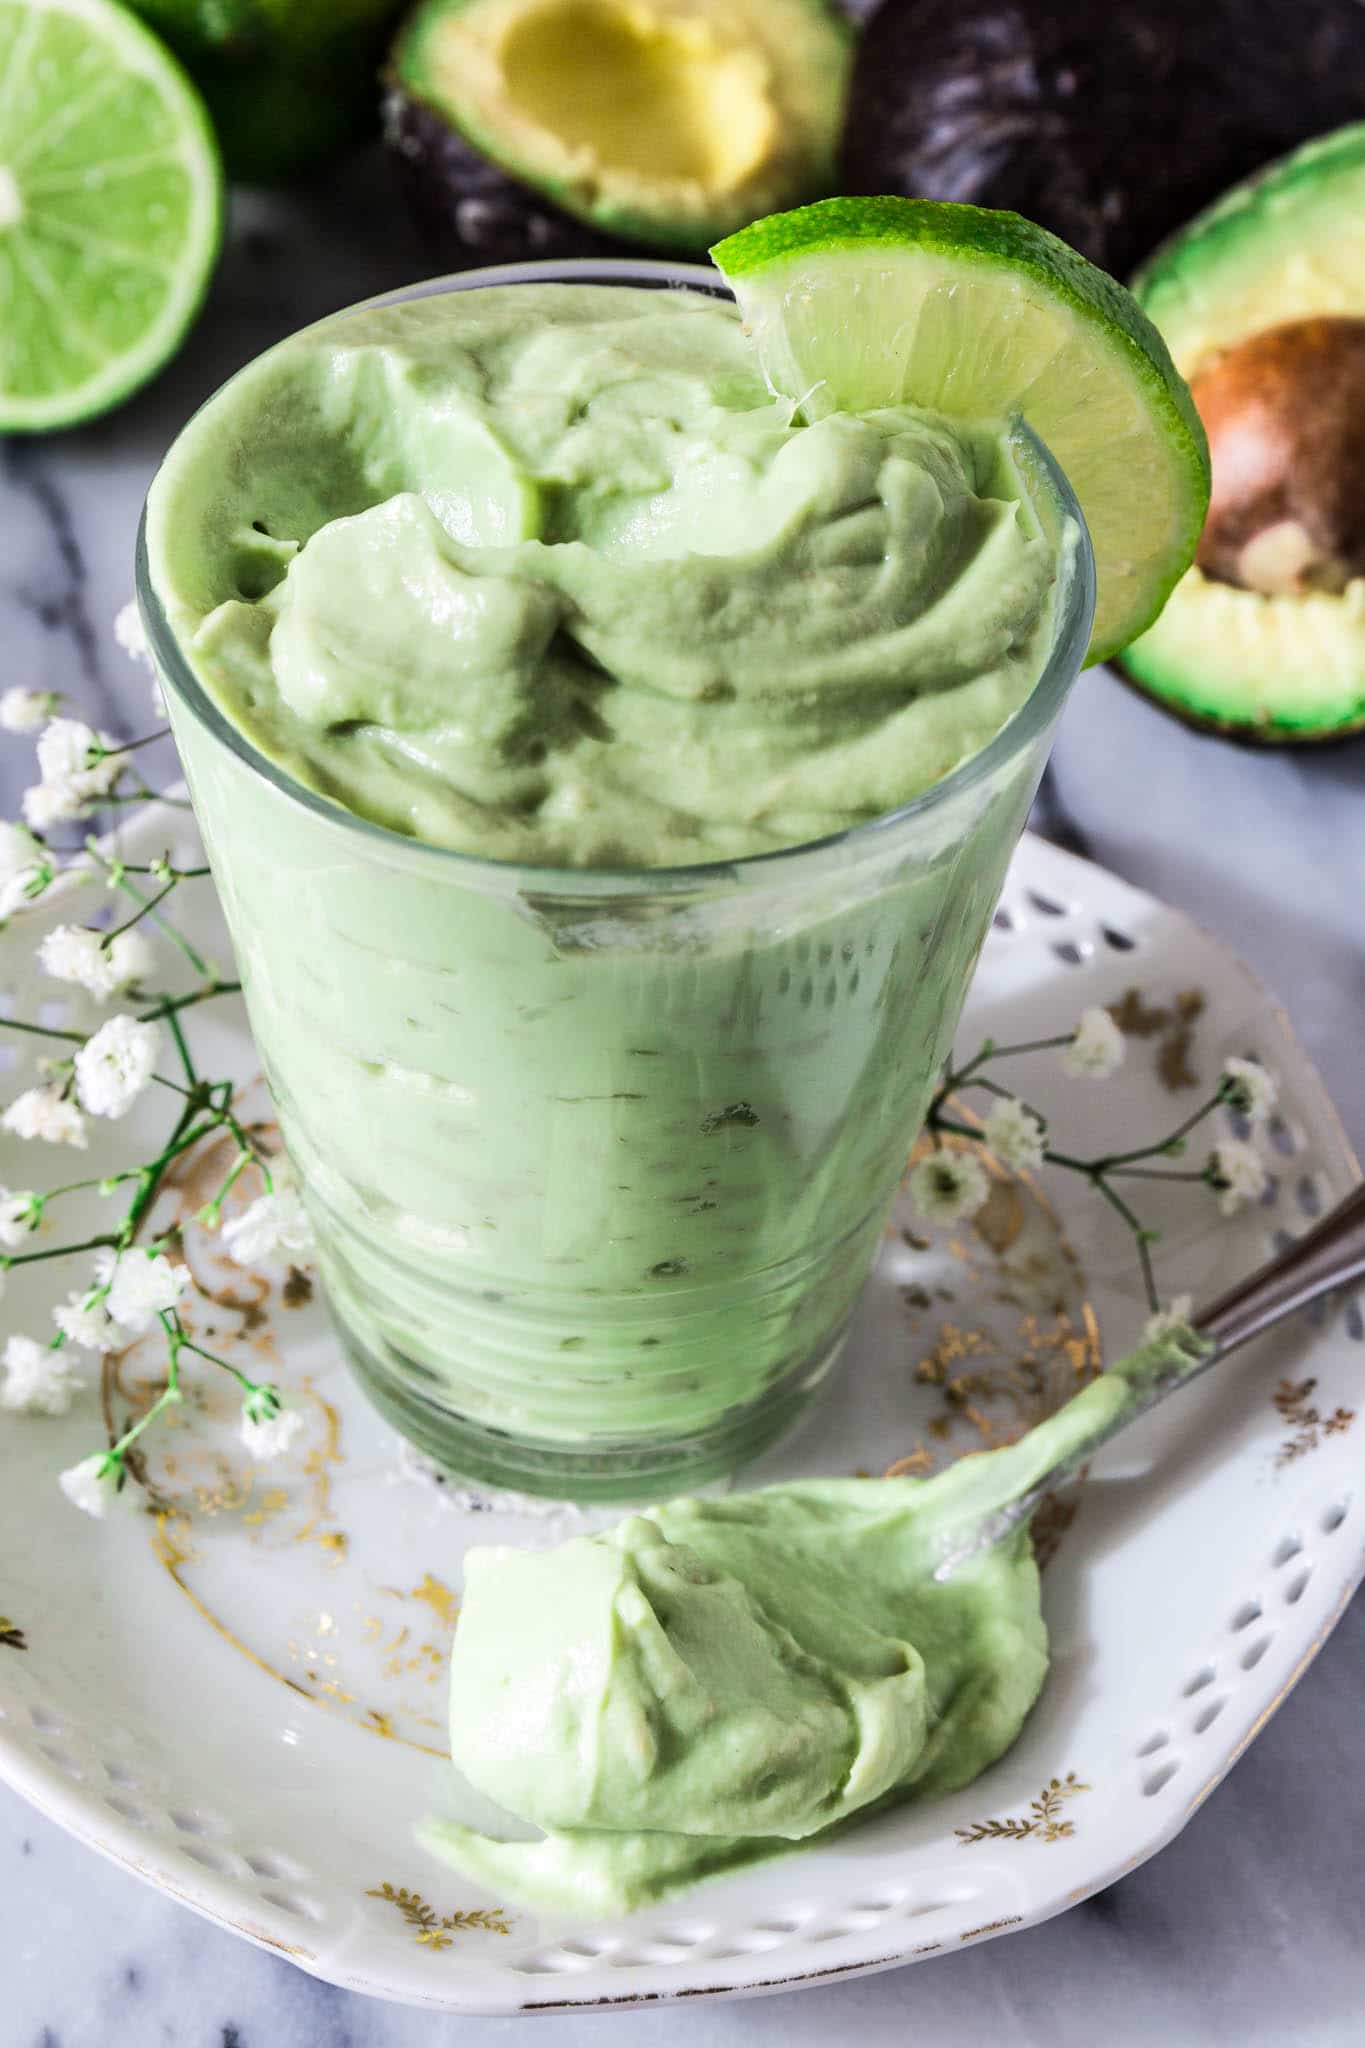 Raw Avocado Lime Mousse | www.oliviascuisine.com | Looking for a guilt free dessert? This Raw Avocado Lime Mousse will do the trick. Not only delicious but also heart check certified! ❤️️ Oh, and made with only 3 ingredients. What could be better than that?